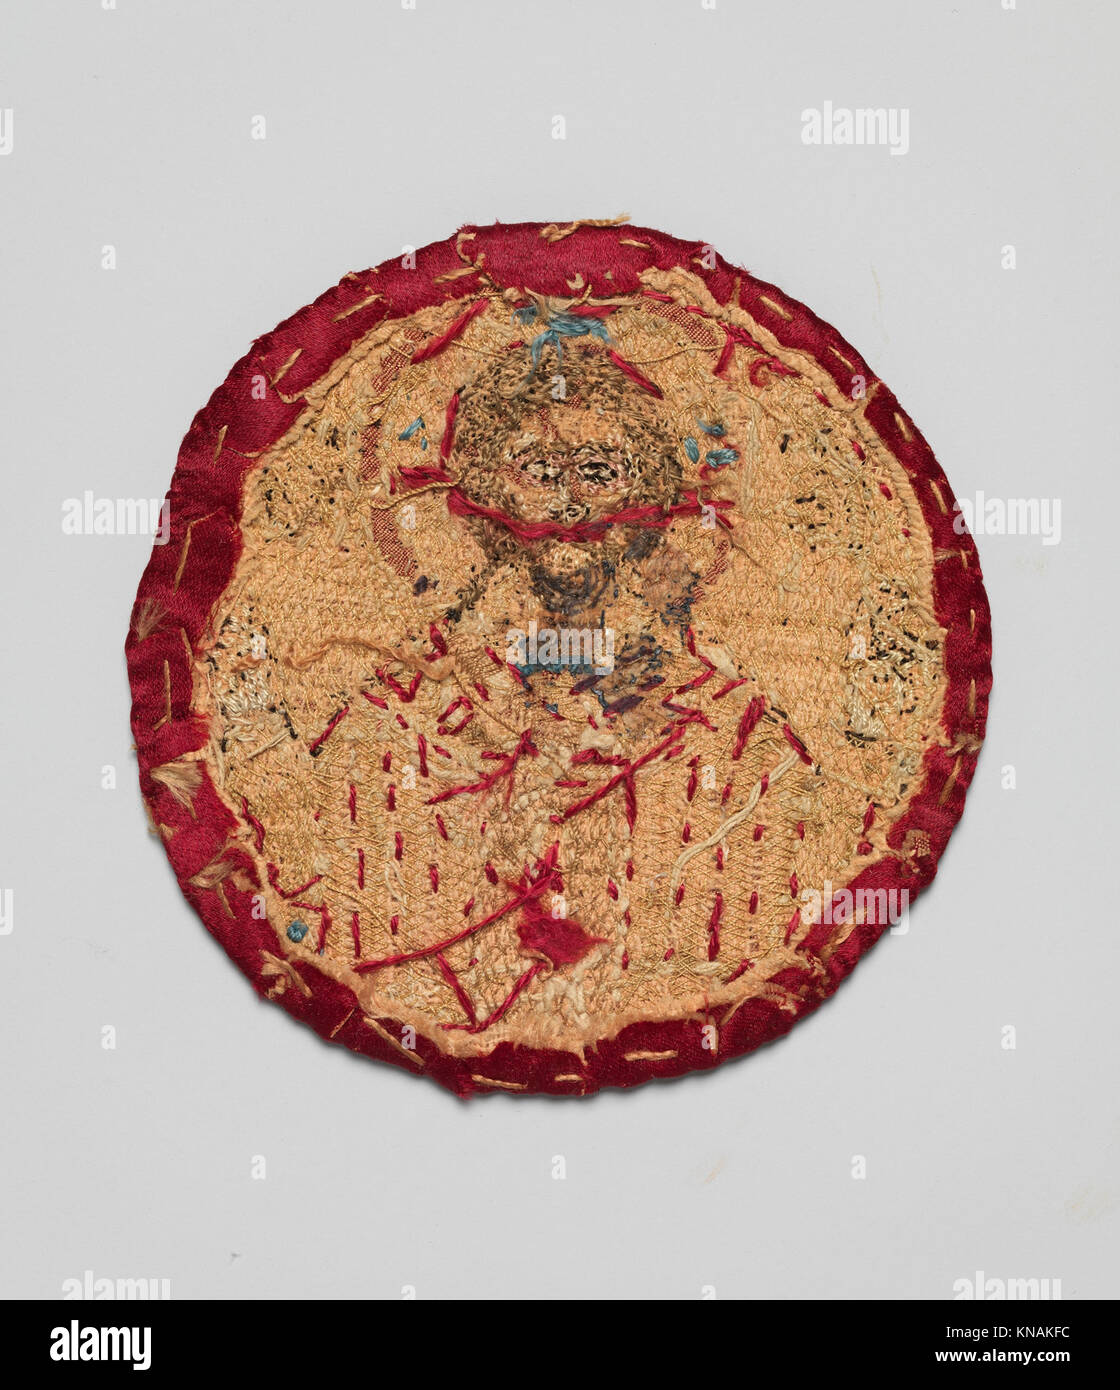 Appliqué from a Vestment MET DP291989 466120 Greek, Appliqu? from a Vestment, 17th?18th century, Silk, with silk and silver wrapped silk threads, Diameter: 4 in. (10.2 cm) Storage: 9 ? 9 ? 1 in. (22.9 ? 22.9 ? 2.5 cm). The Metropolitan Museum of Art, New York. Gift of Jeanne and Lloyd Raport, 1984 (1984.506) Stock Photo